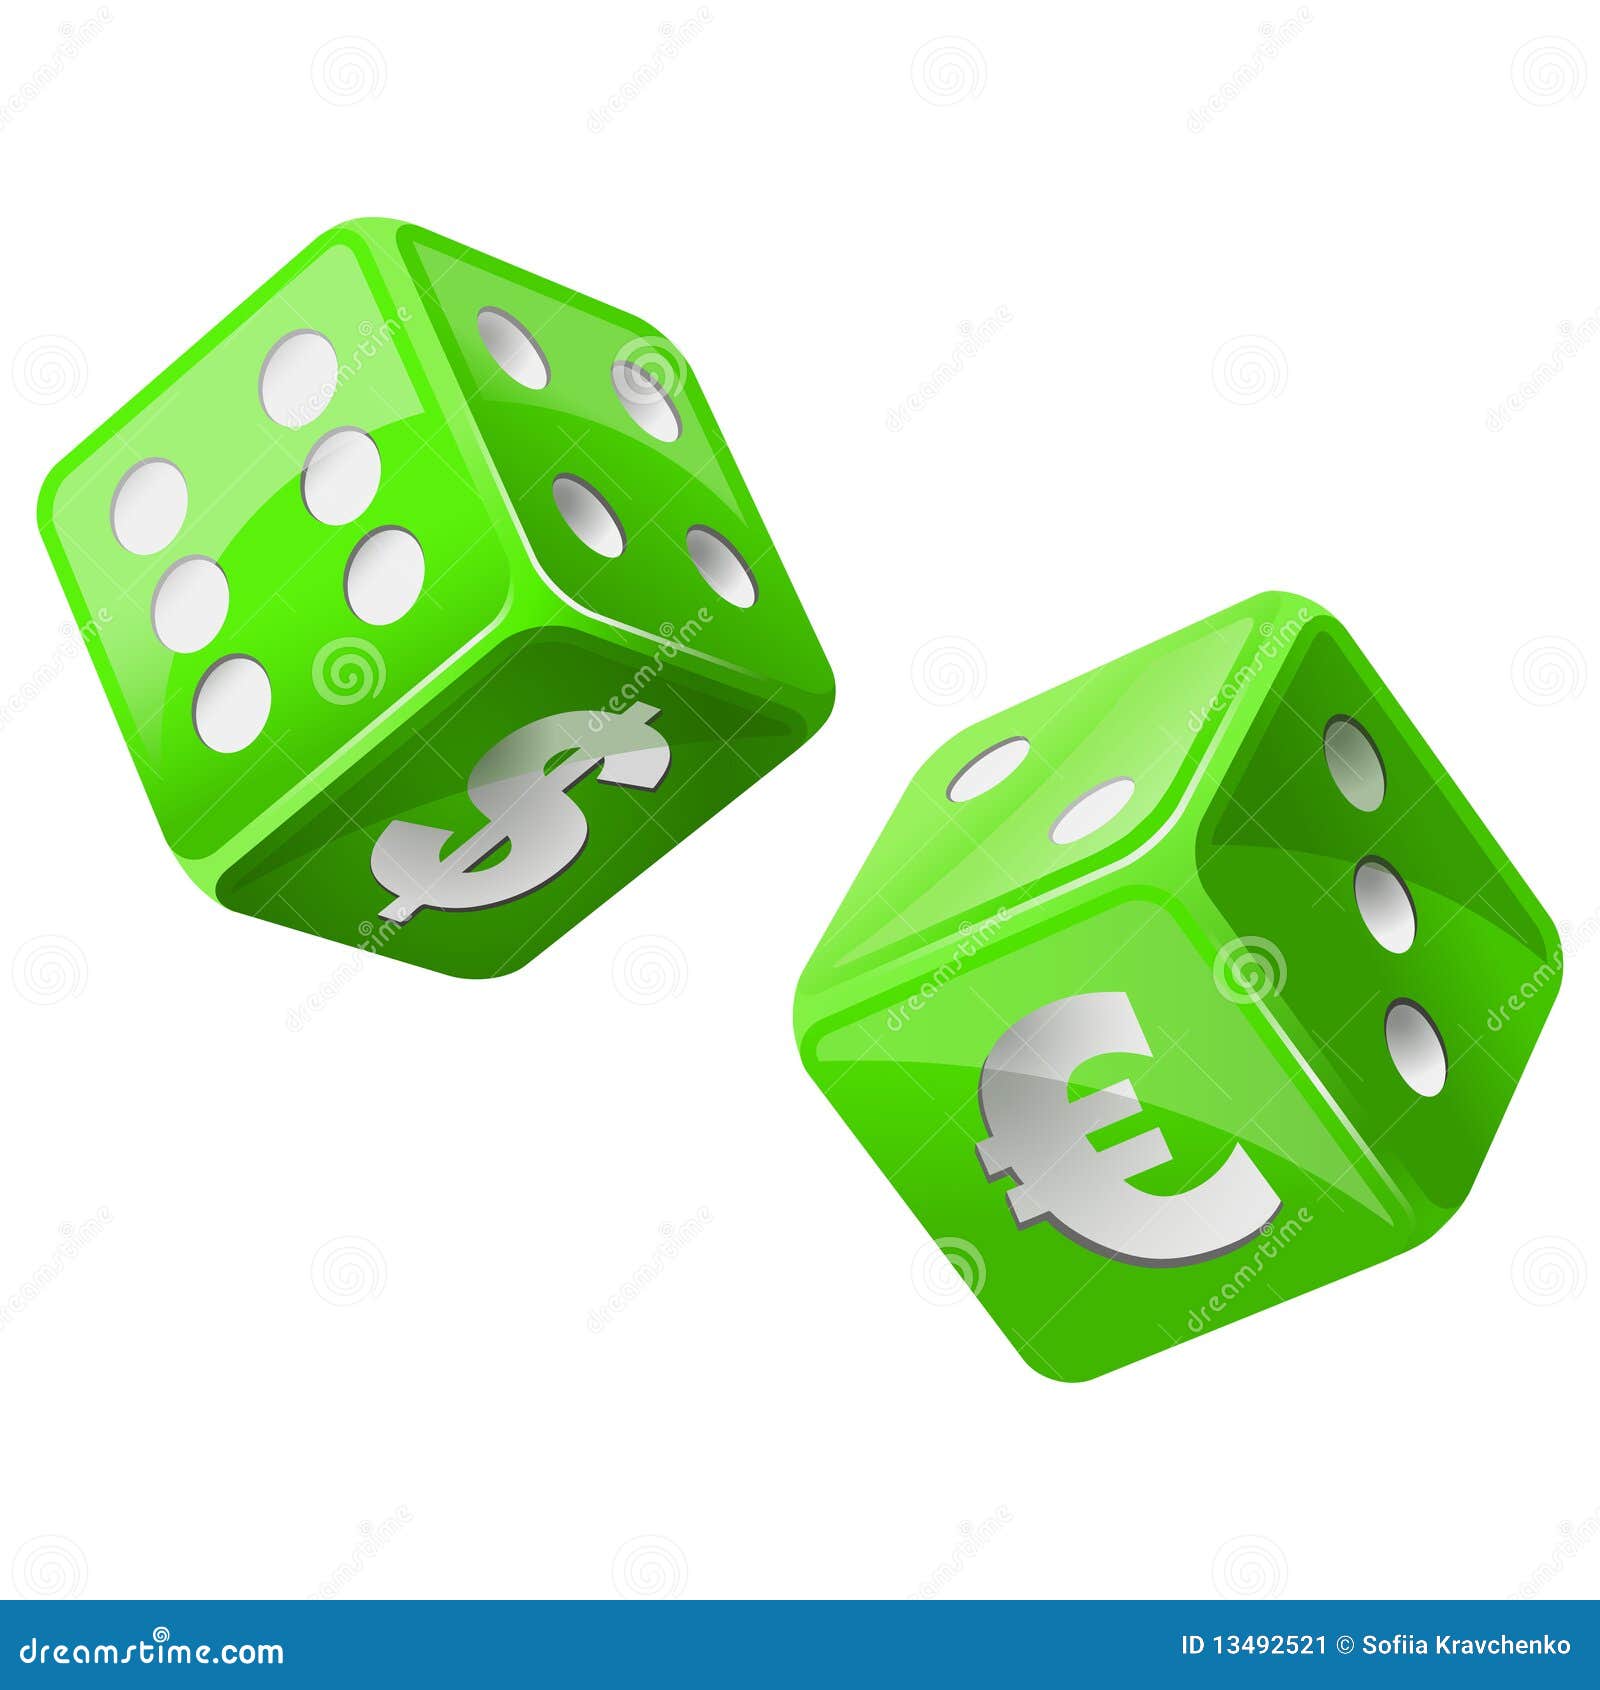 green dice clipart - photo #20